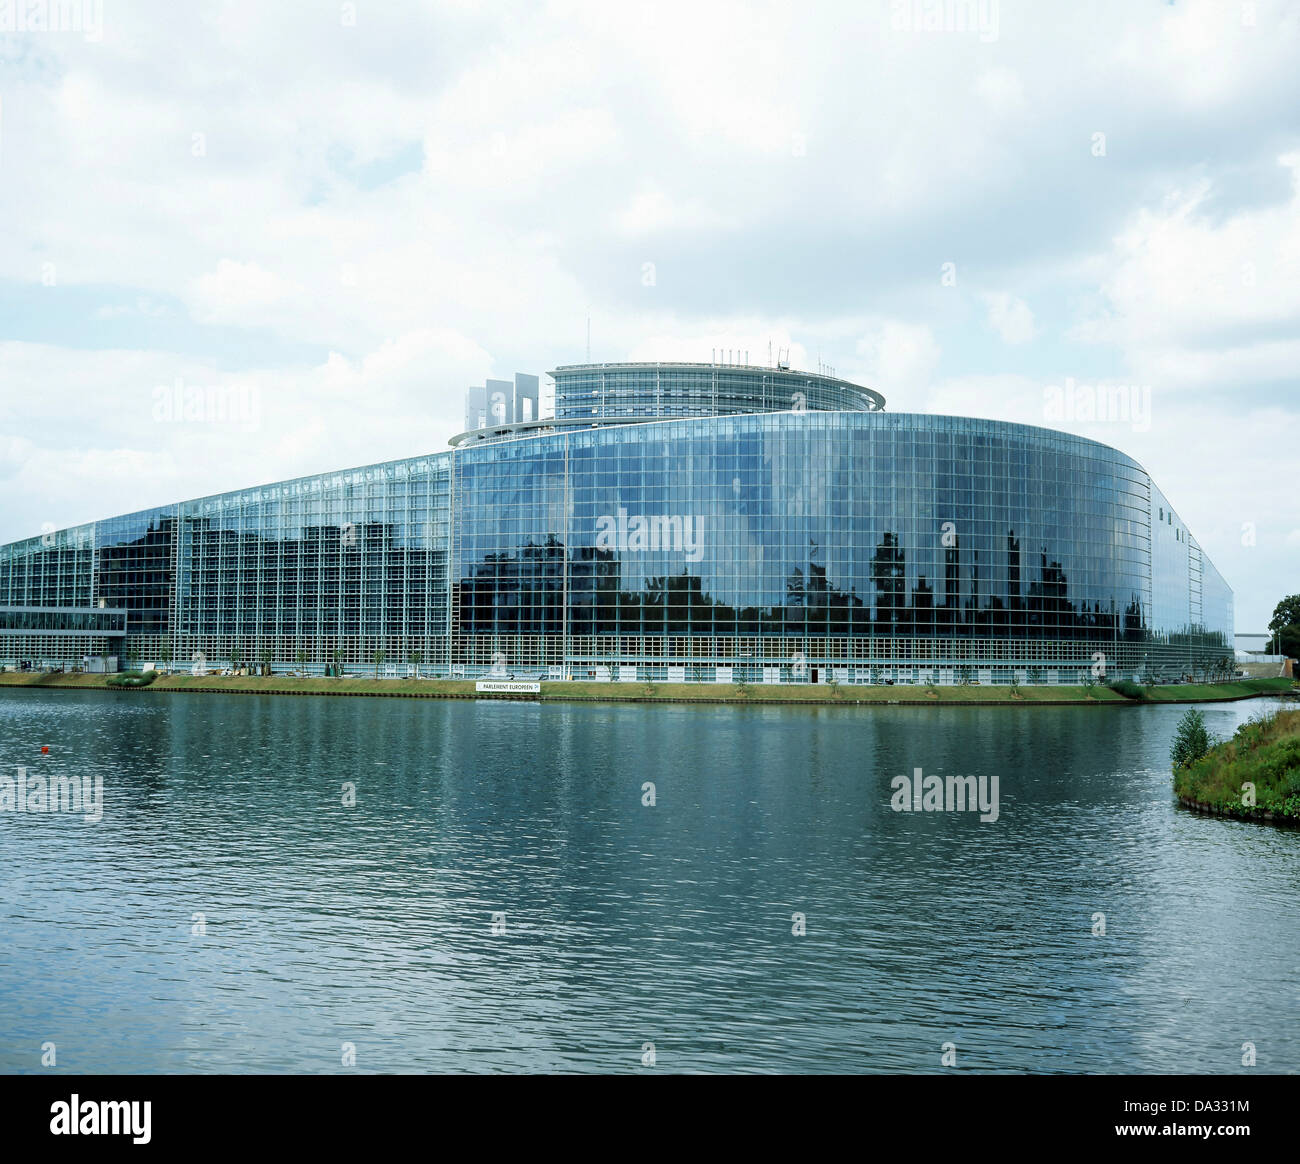 Louise Weiss building, European Parliament, Ill river, Strasbourg, Alsace, France Stock Photo